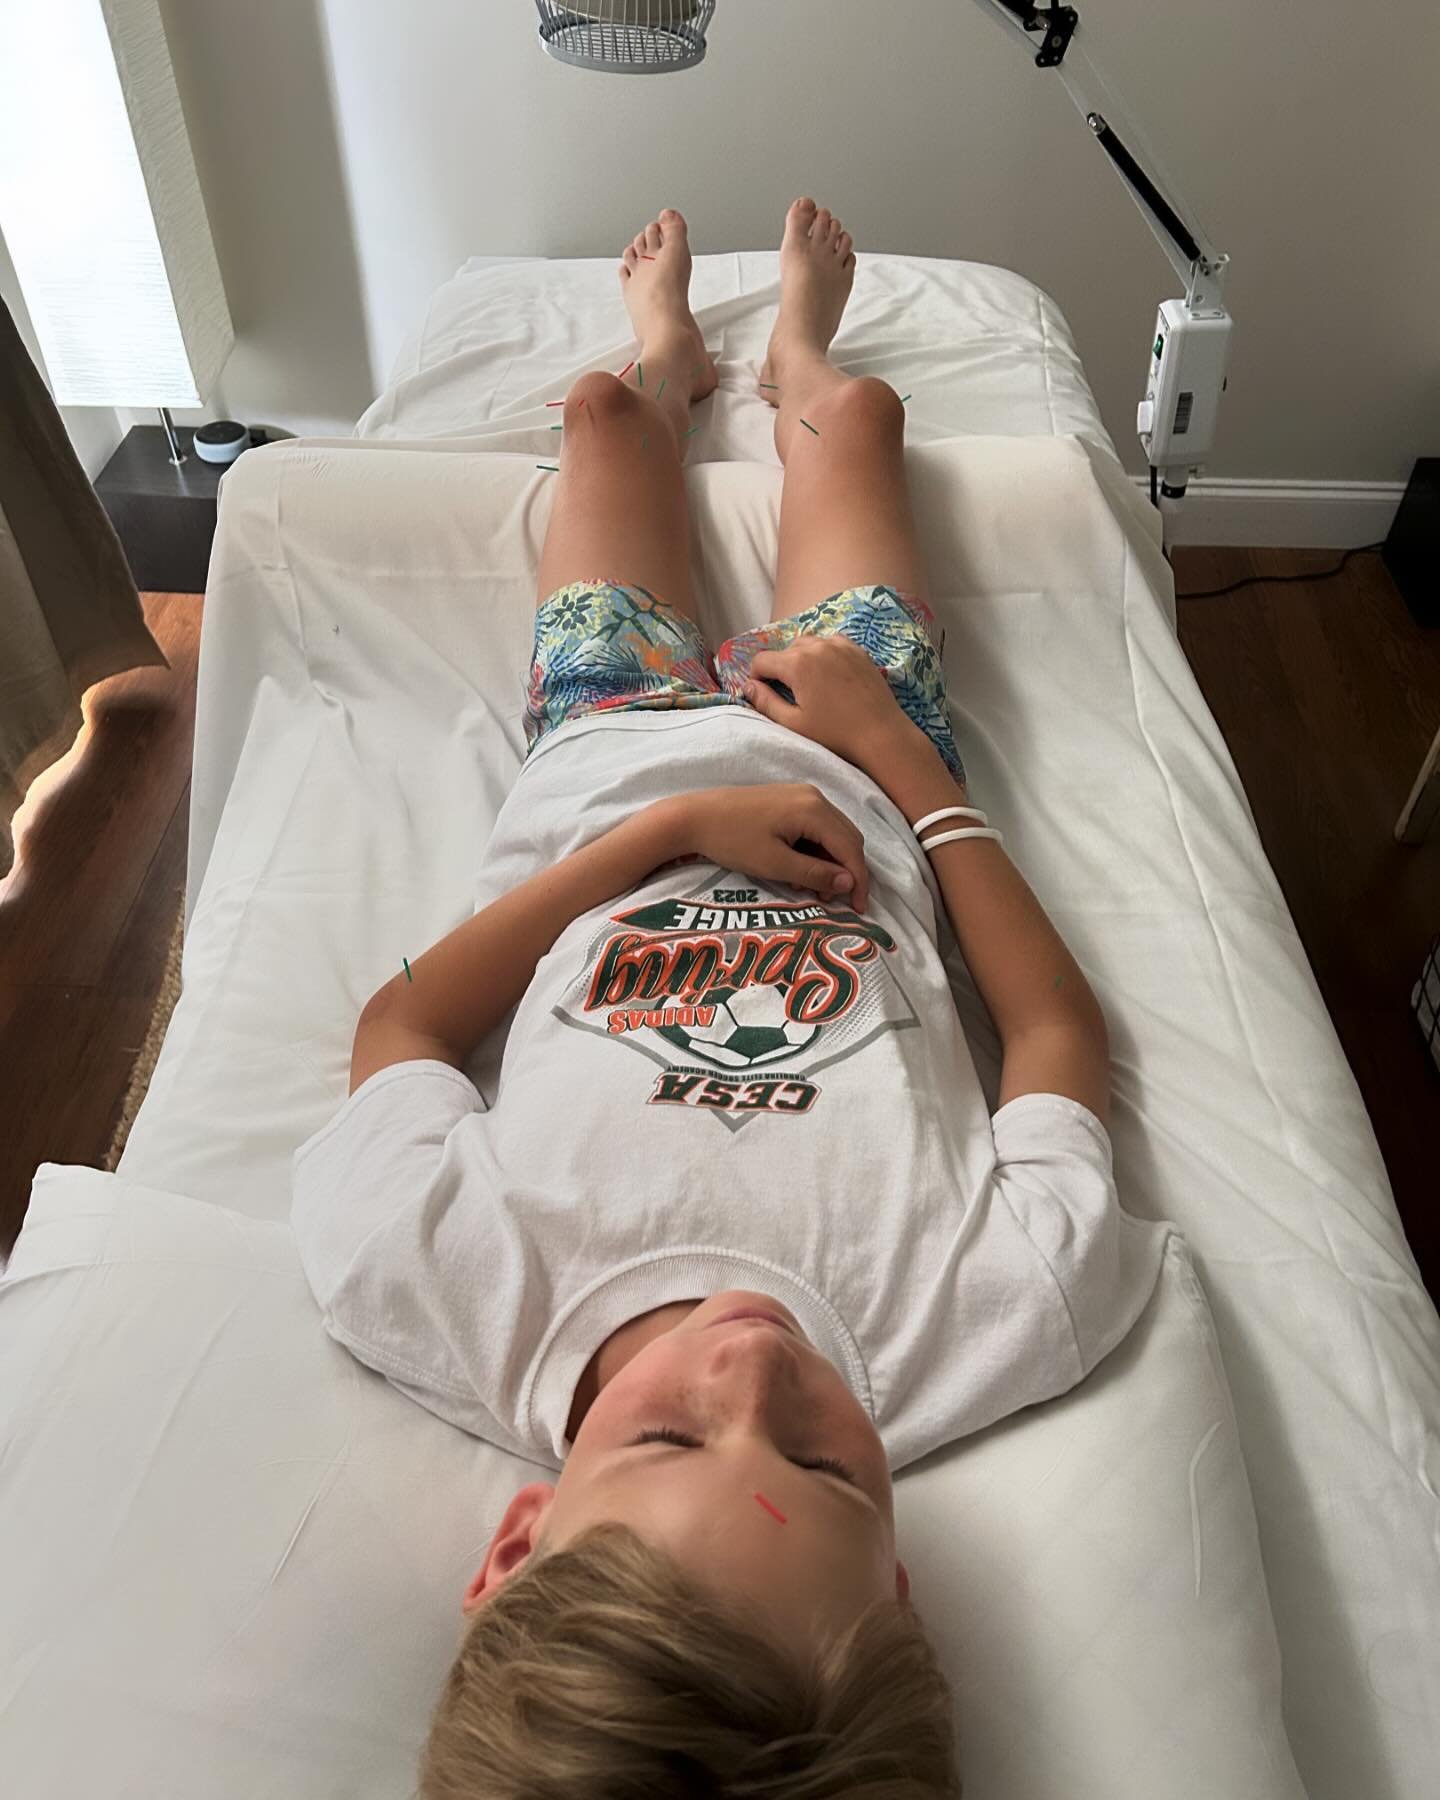 Dr. Naomi working her pediatric magic 🪄 for this kiddo! Treating growing pains and knee pain from playing soccer. He did great with his points and said he felt very relaxed 😌 

Dr. Naomi is accepting new pediatric patients, ages newborn to 12 years